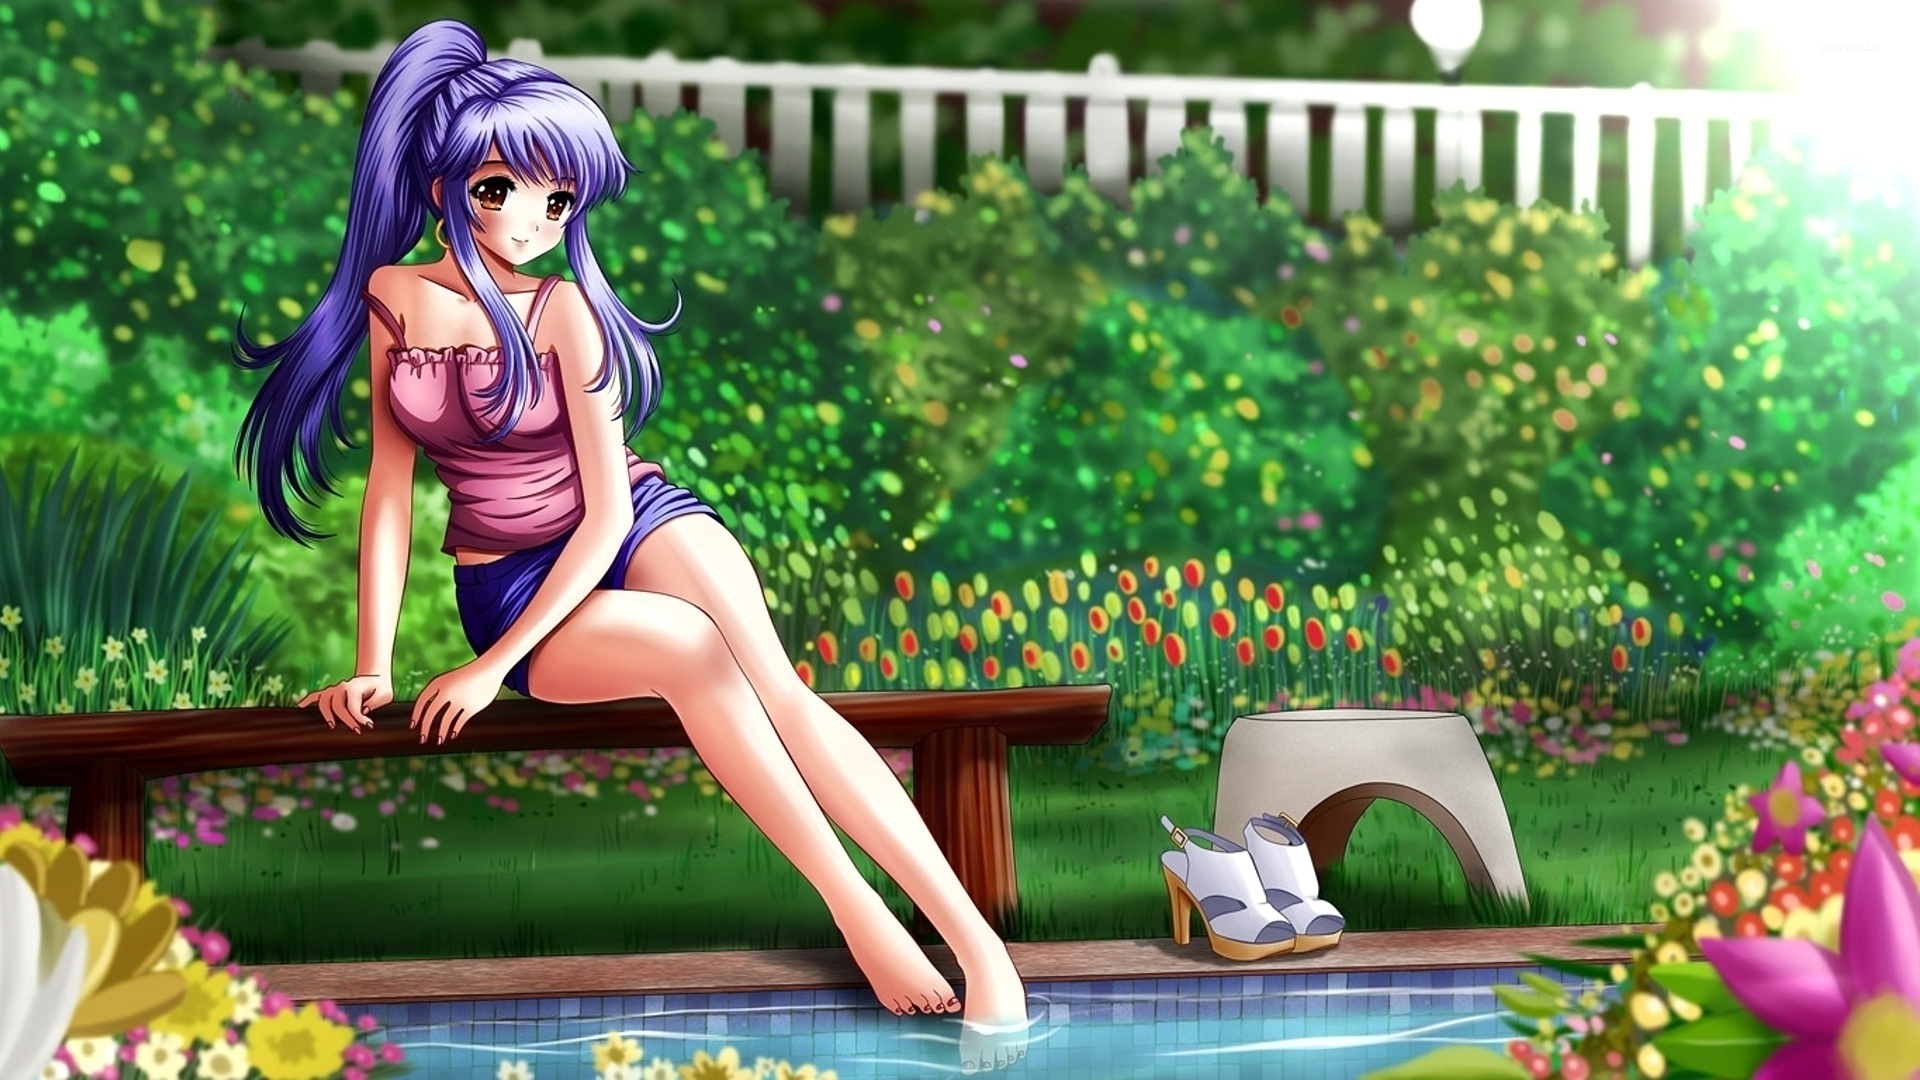 Beautiful Girl With Purple Hair With Legs In The Pool Wallpaper